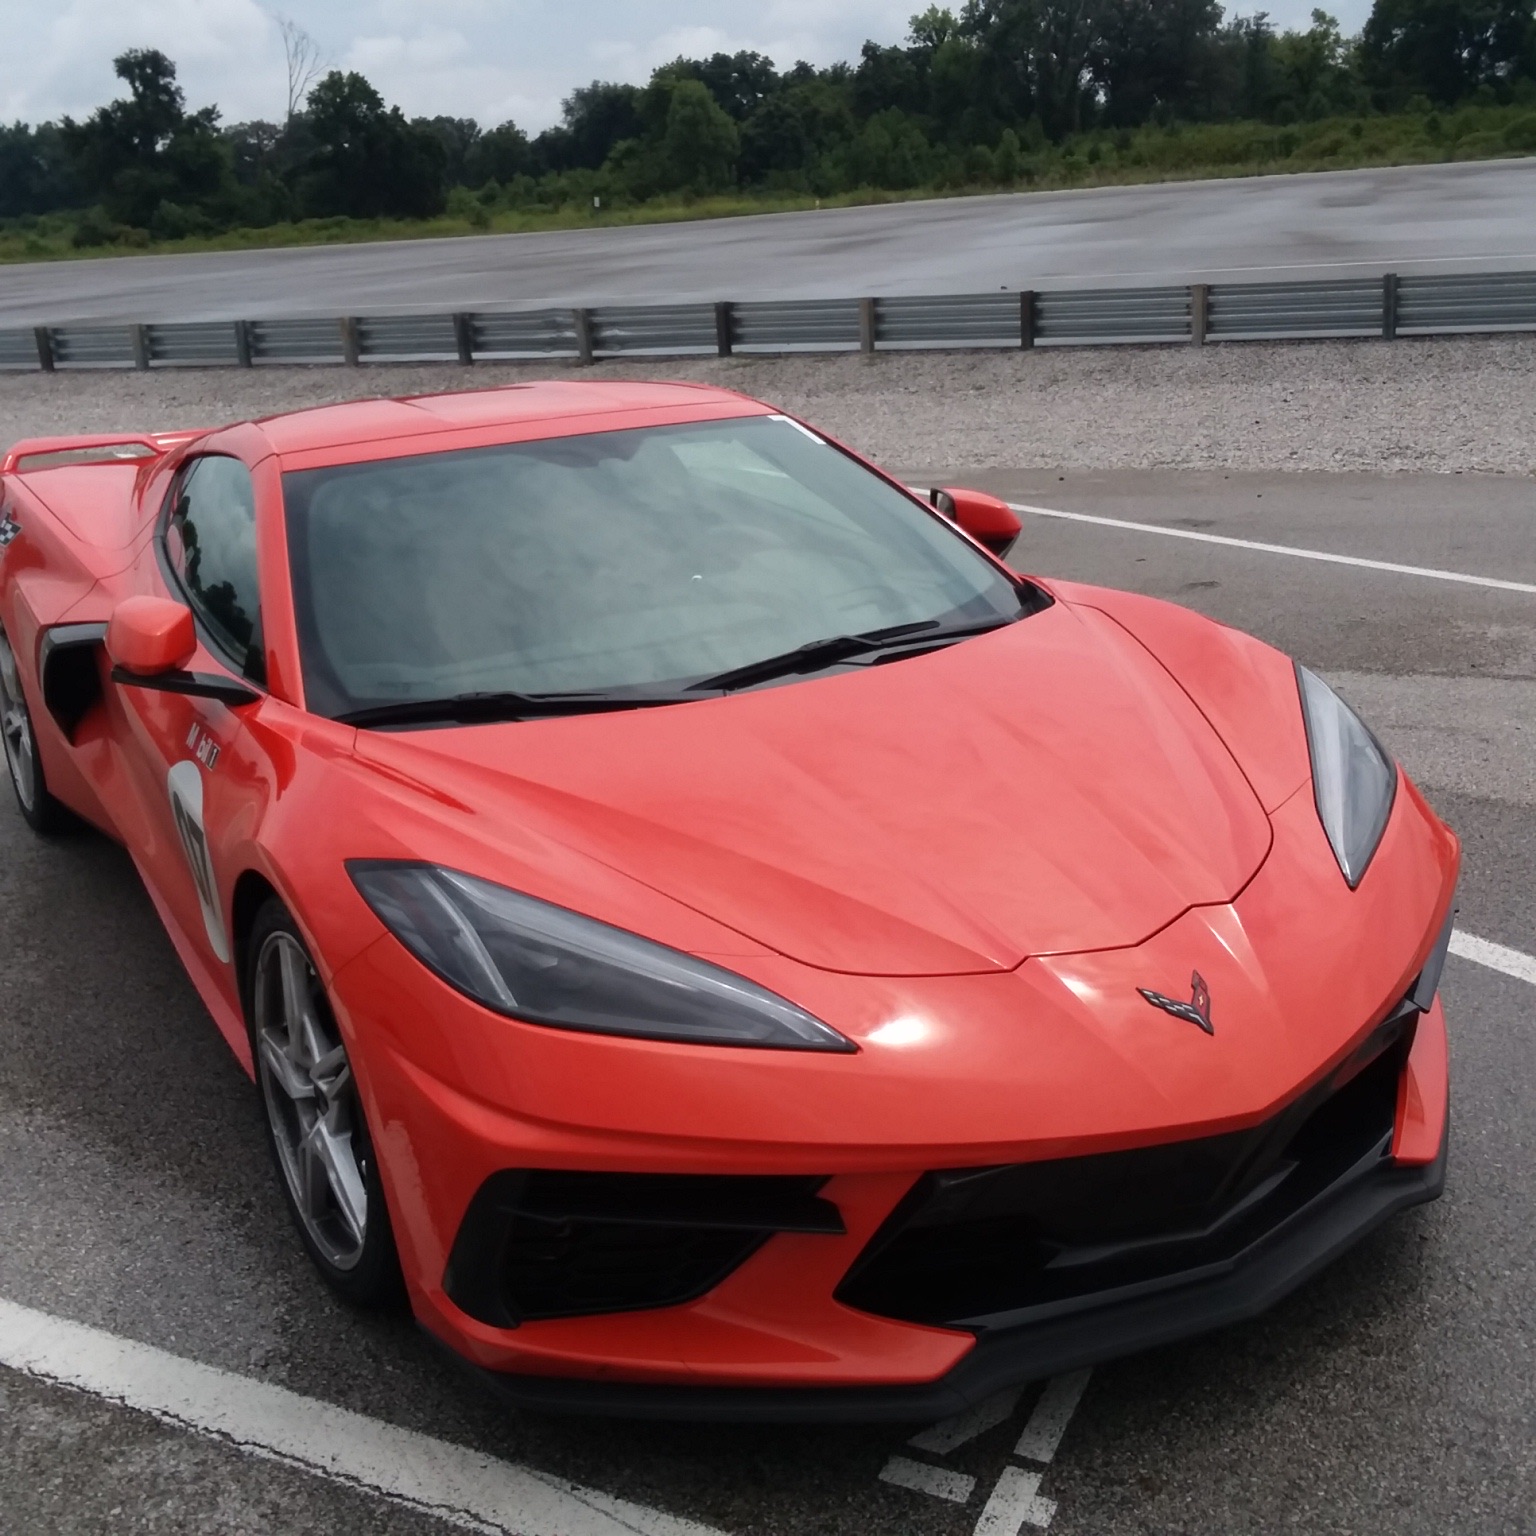 The 2021 Corvette Stingray at the NCM Motorsports Park. Try driving one - its an experience you'll never forget.